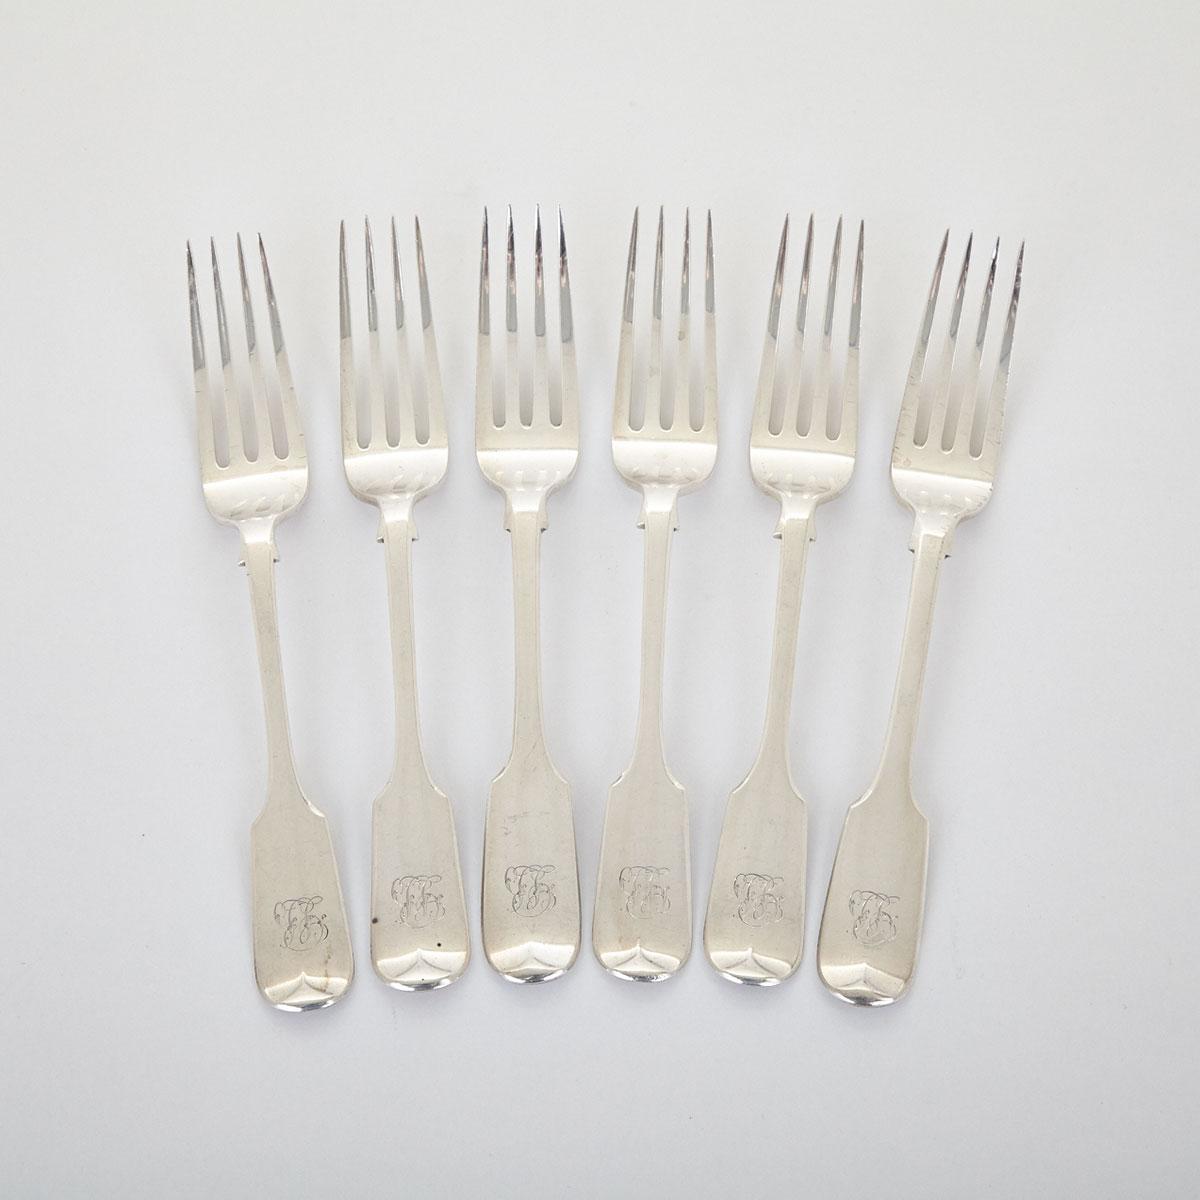 Six Victorian Silver Fiddle Pattern Table Forks, Richard Britton, London, 1838 (2) and Elizabeth Eaton, 1850 (4)